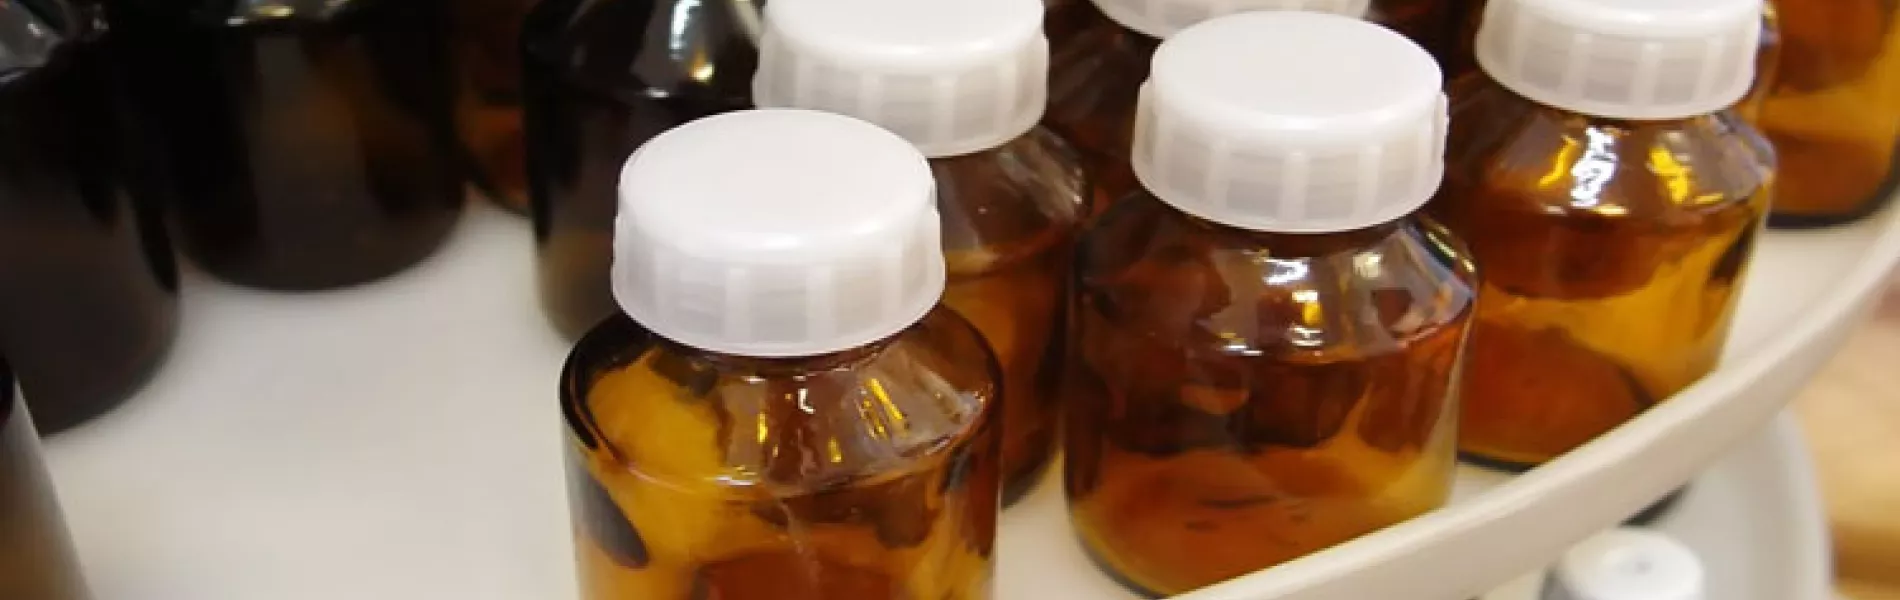 Continuous Manufacturing - Pill bottles